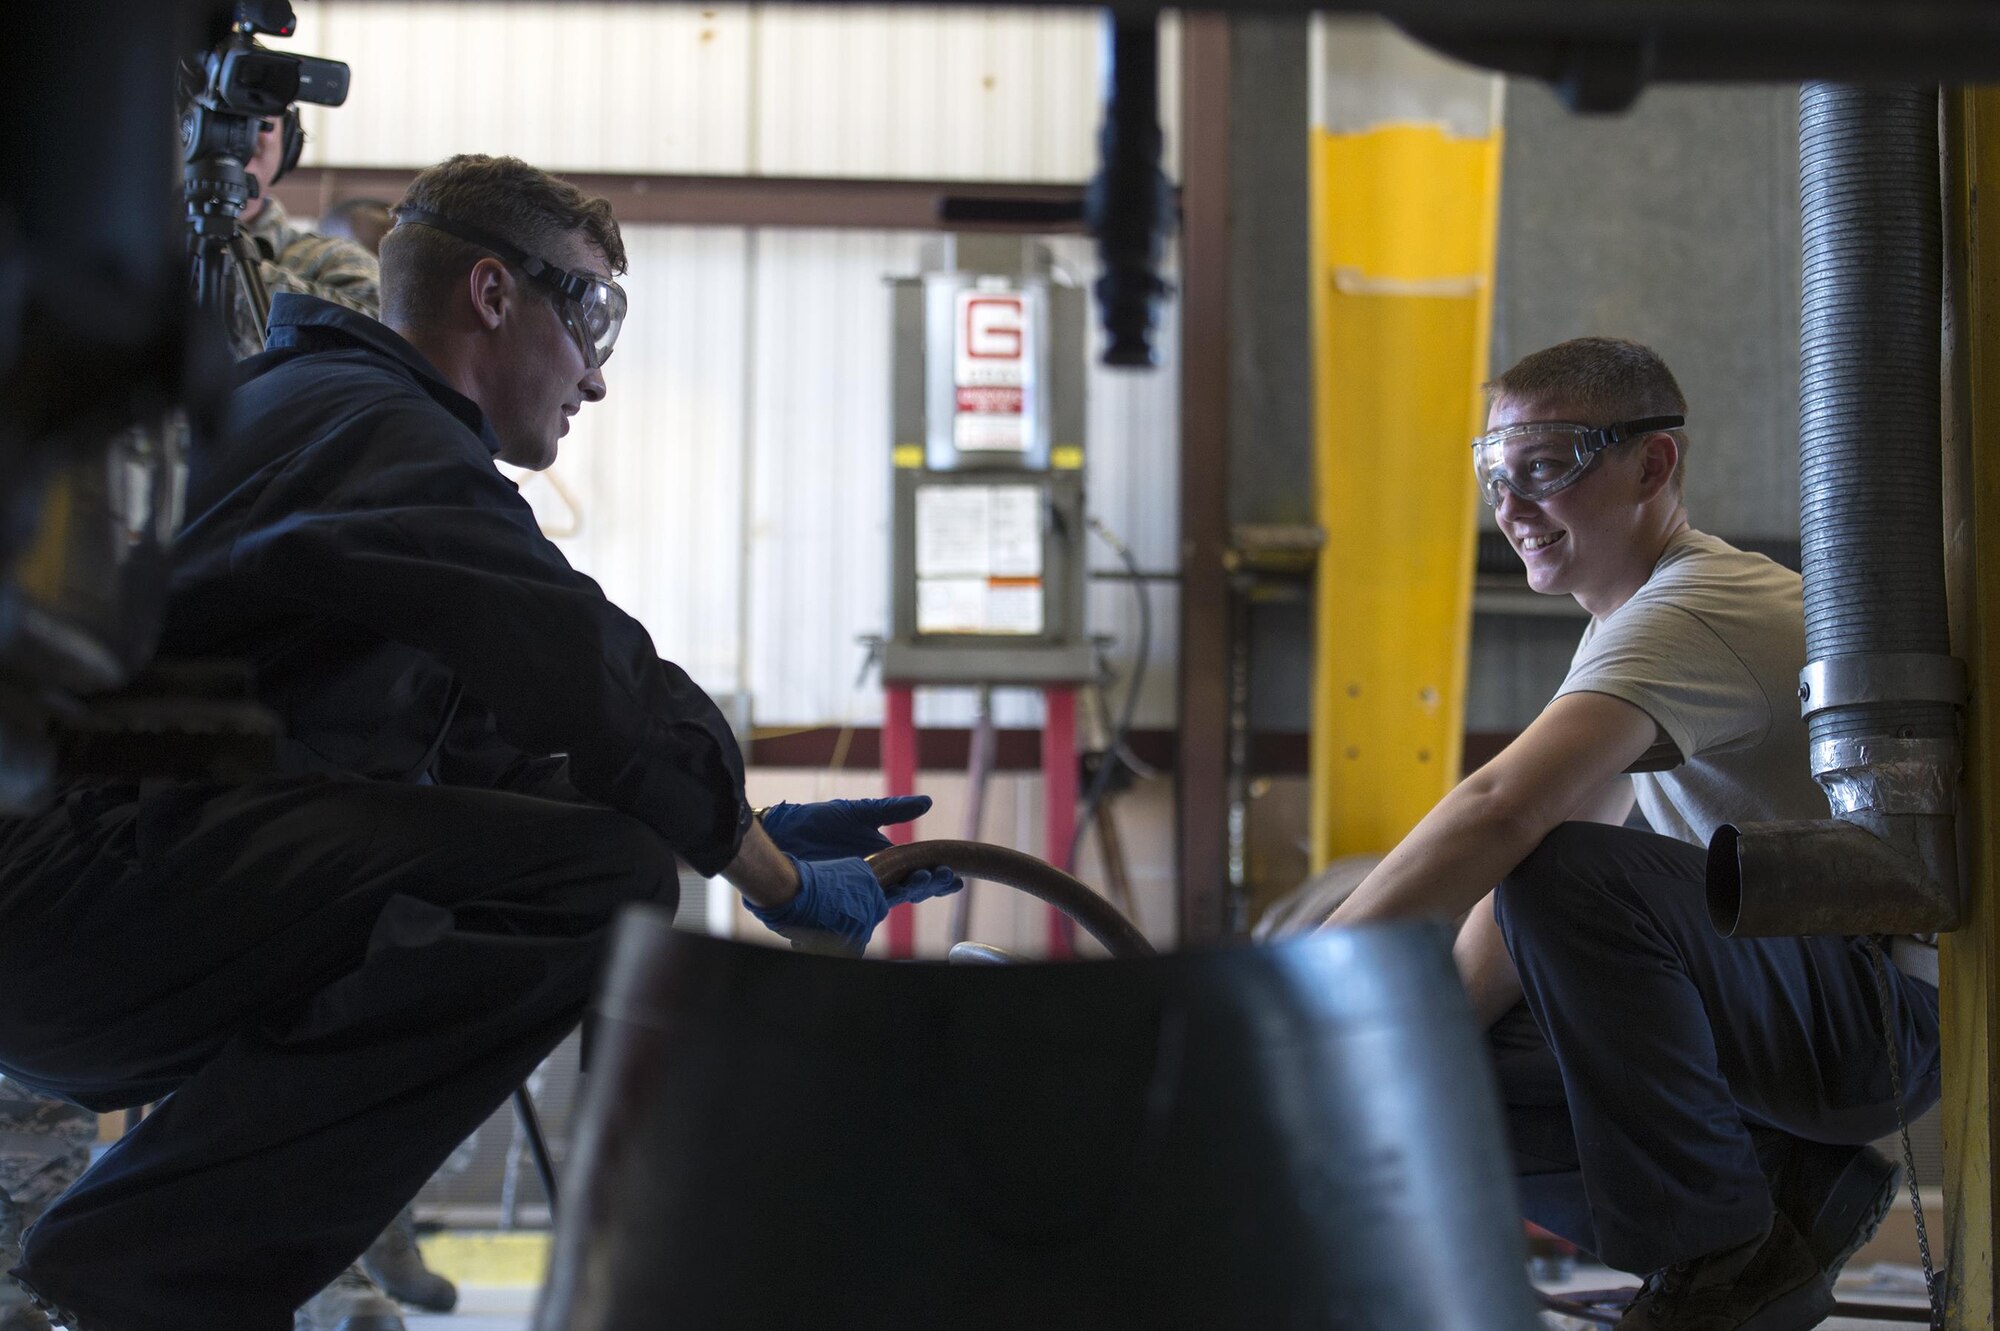 Senior Airman Kyle Saunders, 23d Wing Public Affairs broadcaster, left, interacts with Airman 1st Class Charles Price, 23d Logistics Readiness Squadron vehicle maintenance specialist, as they filter fuel during the ‘A Closer Look,’ video series, July 13, 2017, at Moody Air Force Base, Ga. The series shows 23d WG PA broadcasters experiencing the grit and grime of several trades for Airmen to better understand and appreciate different missions. To watch the series, stay tuned for the premier on the Moody Facebook page and www.moody.af.mil, August 15. (U.S. Air Force photo by Senior Airman Greg Nash)